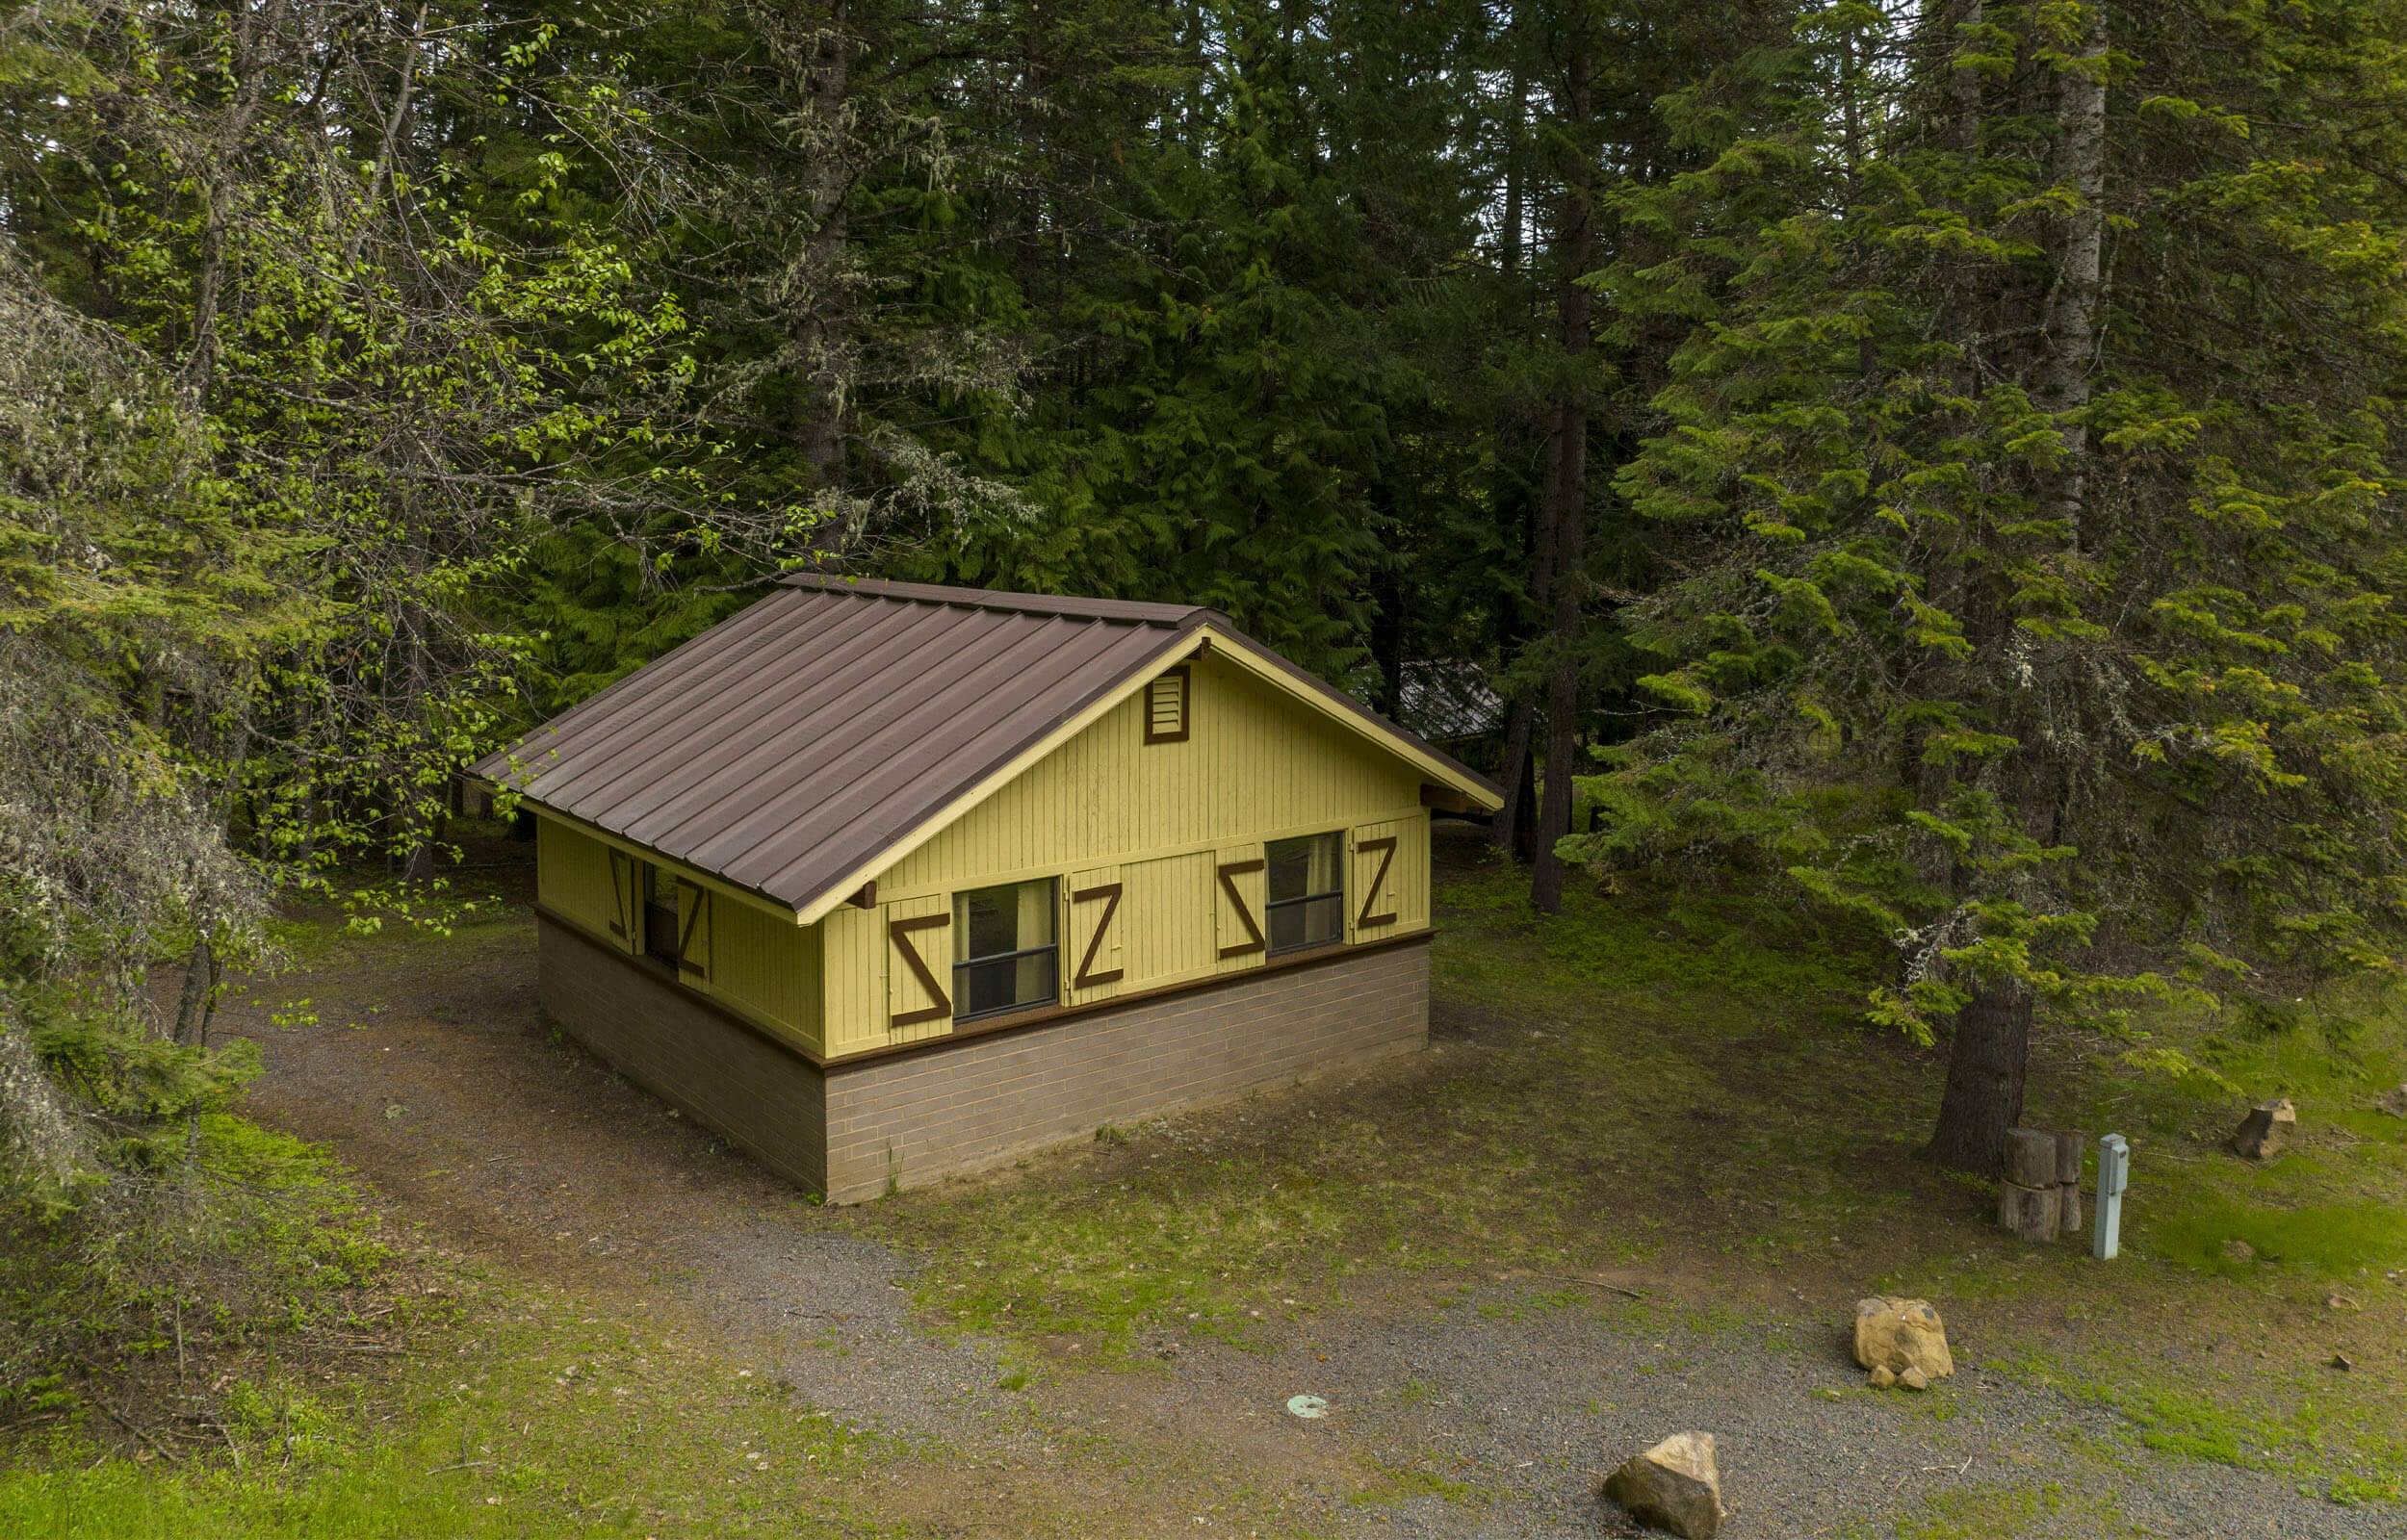 An overhead shot of the Three Meadows Group Campground cabin surrounded by forest.